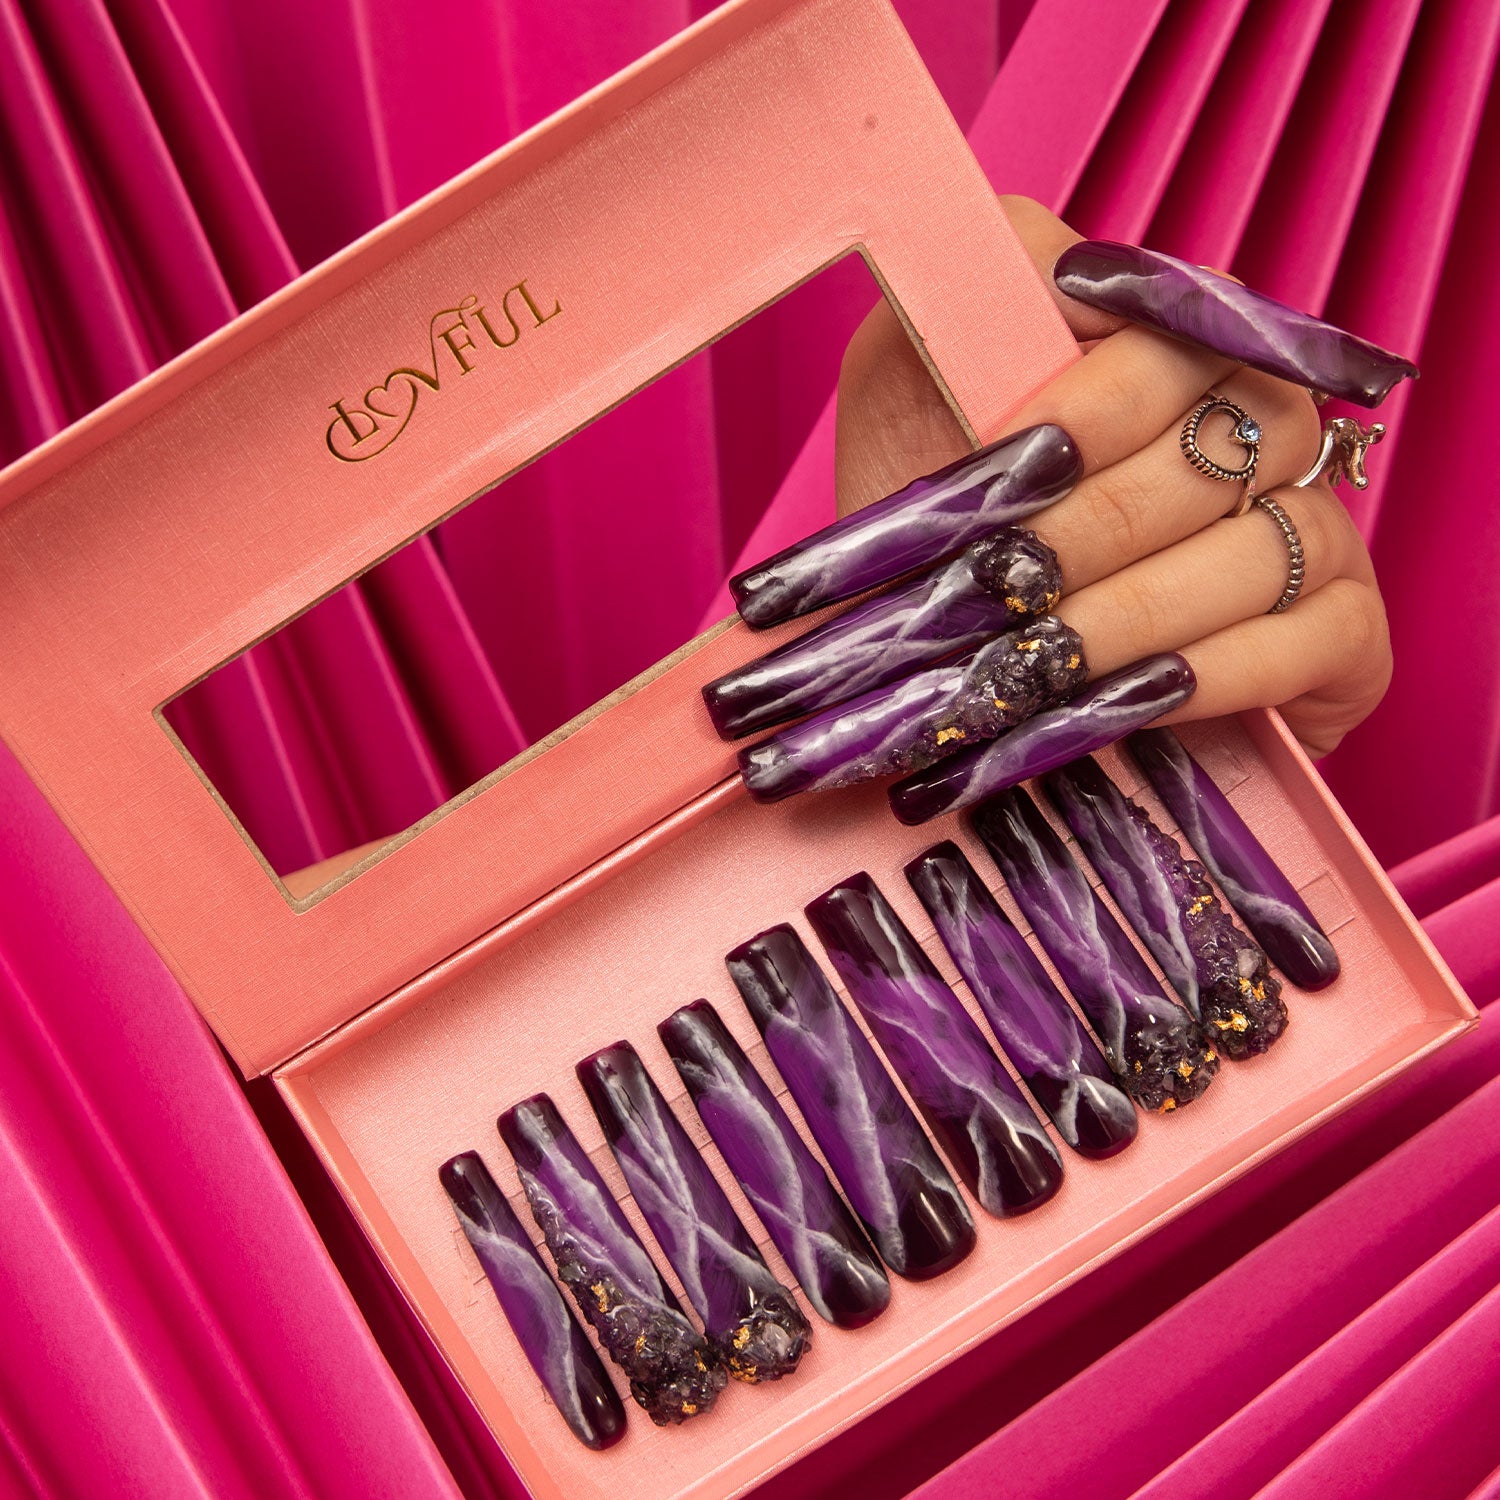 Set of Dream Amethyst press-on nails with elegant purple and black marbled design in a pink box, with a hand wearing matching nails against a draped pink fabric backdrop.